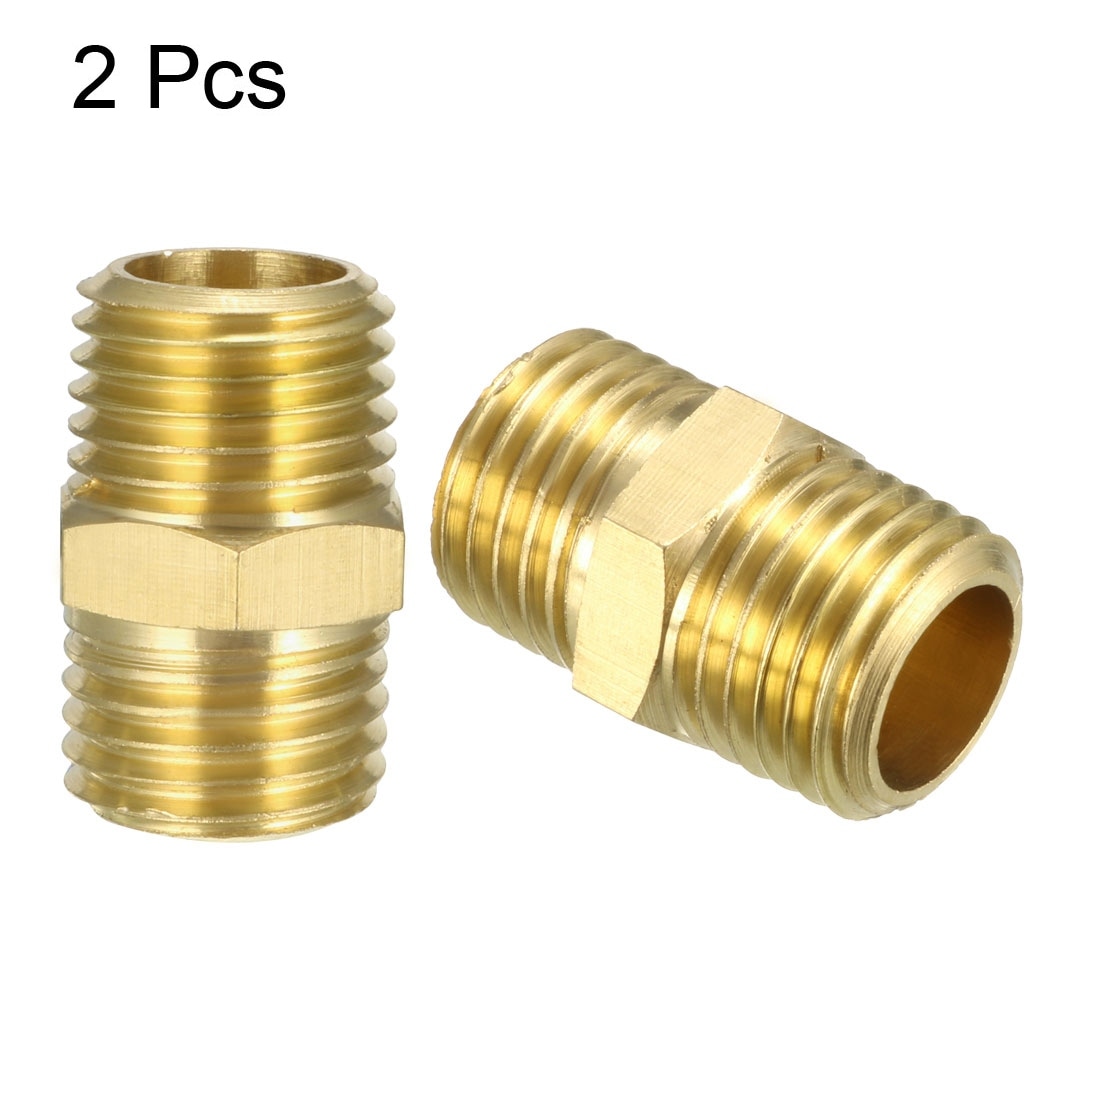 1/4 NPT Pipe Fitting Male Brass Hex Reducing Nipple 5pcs Pipes, Pipe ...